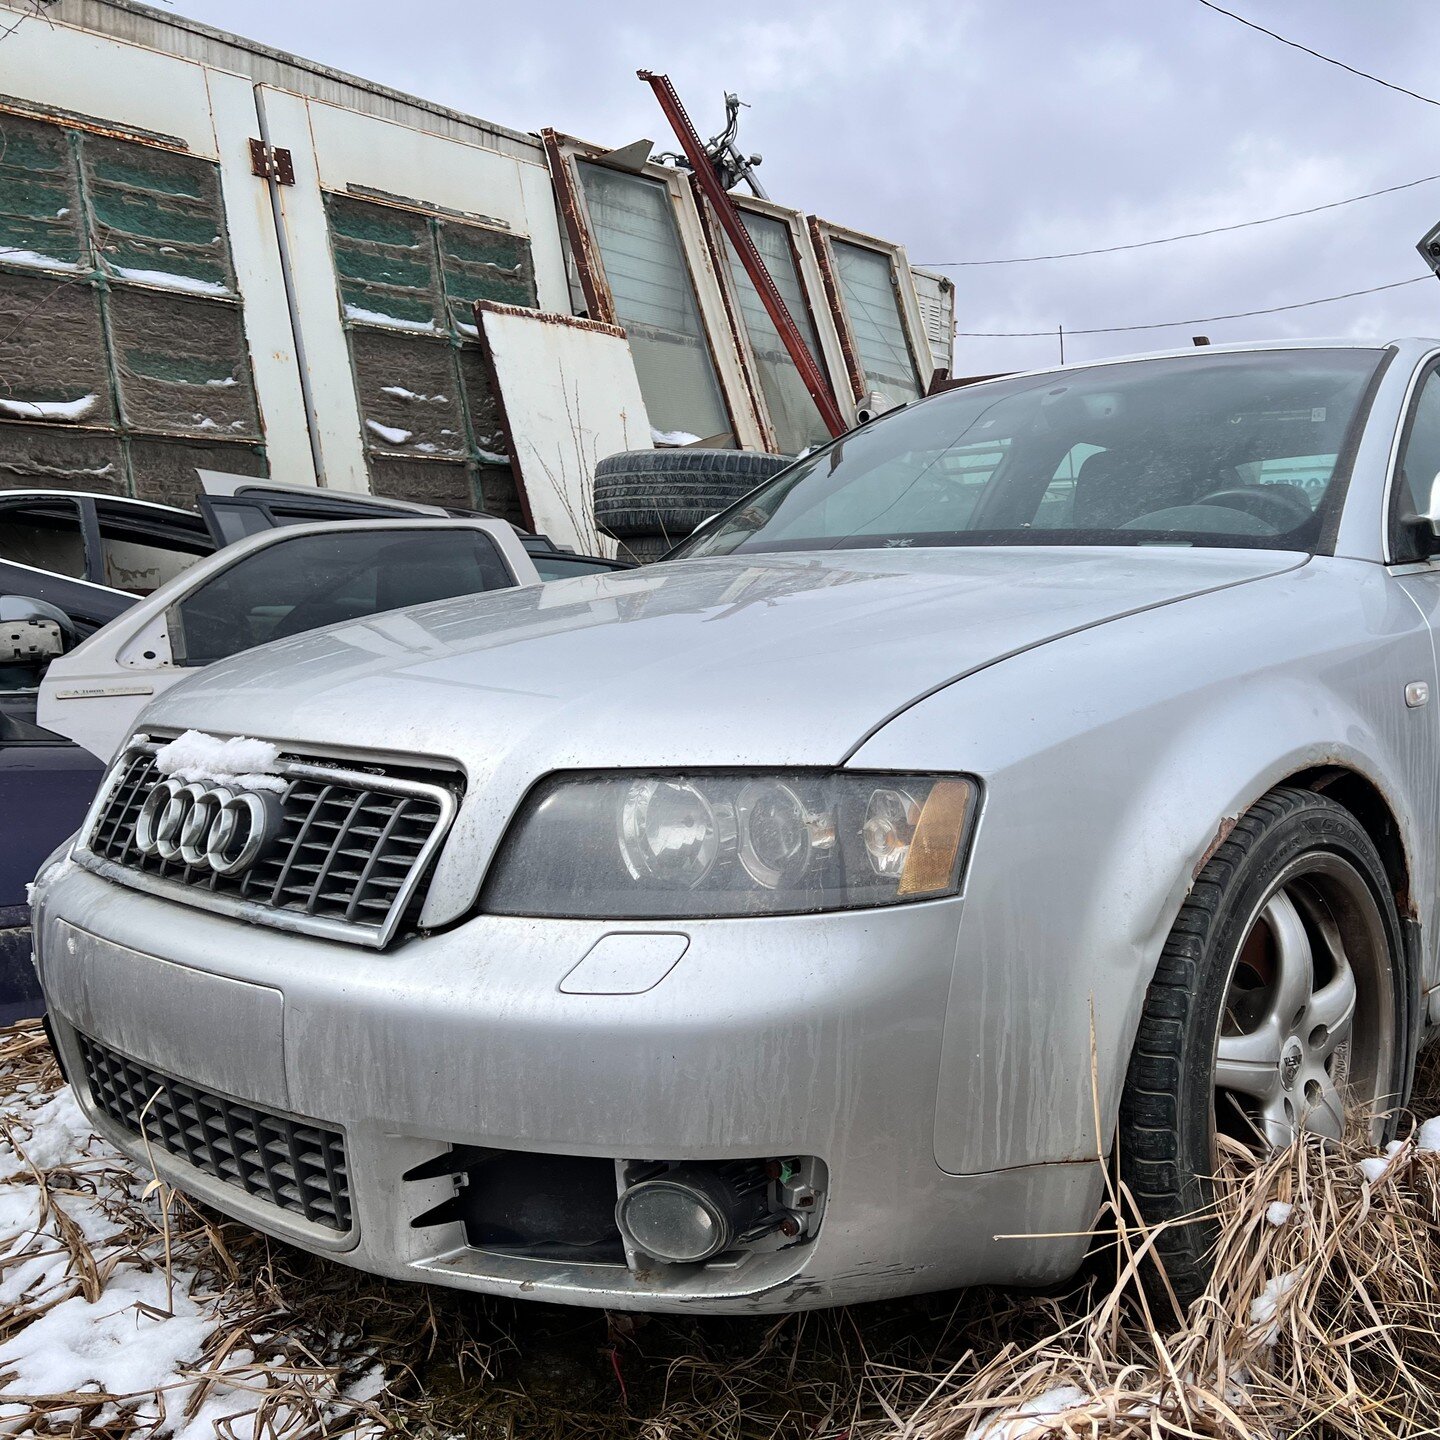 2005 AUDI S4 QUATTRO 4.2L *FOR PARTS* - 4WD, AUTOMATIC TIPTRONIC TRANSMISSION, 8 CYLINDER , SILVER, KMS:164531, VIN:WAUPL68E15AO18451

We offer contactless delivery and are more than willing to accommodate your needs.
Why pick your part when we pull 